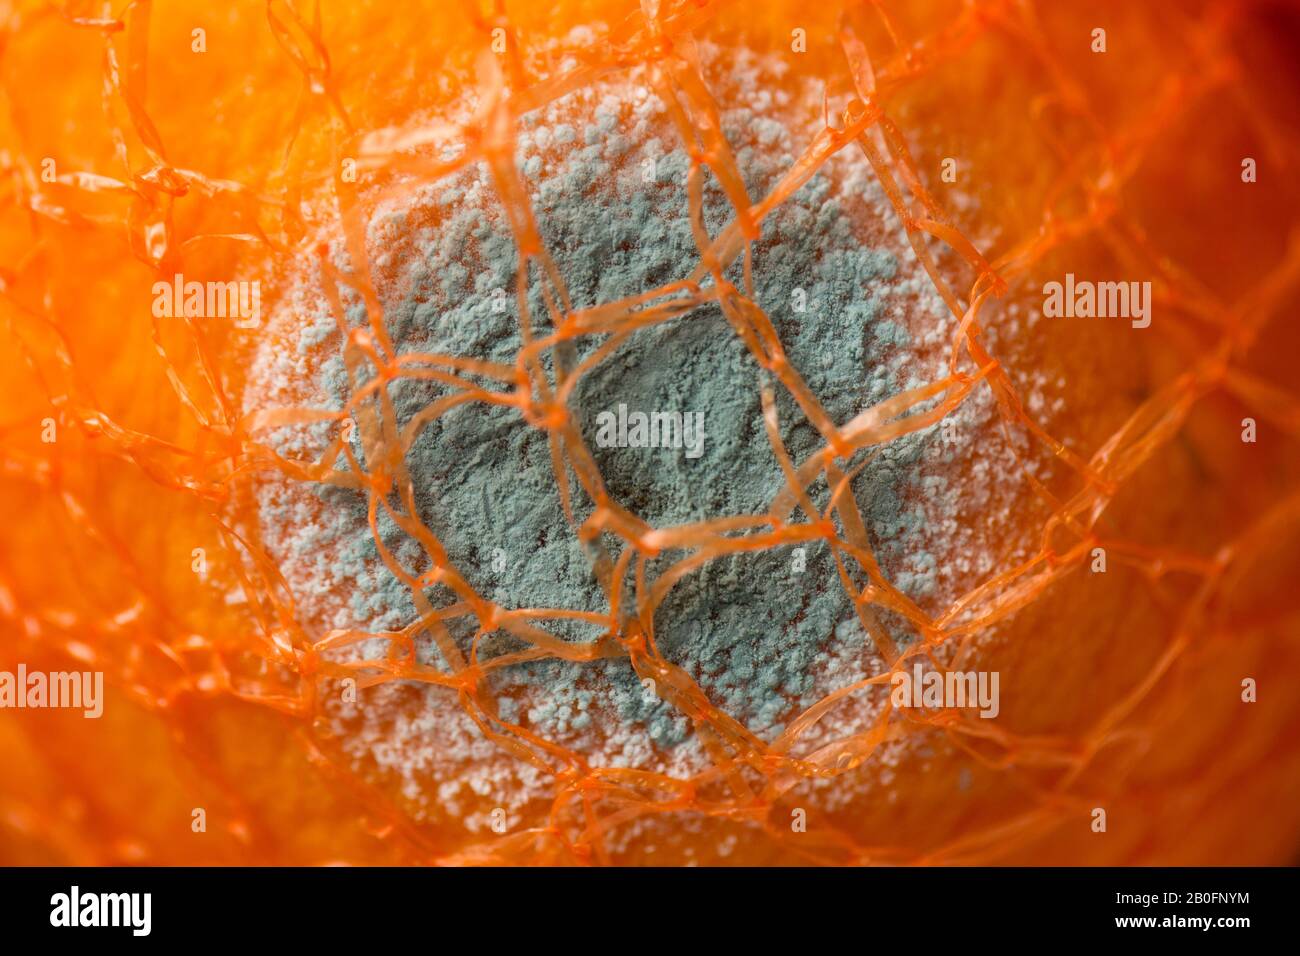 Mould that has formed on the surface of an orange that has been kept in a mesh bag in a fridge for several weeks. England UK GB Stock Photo